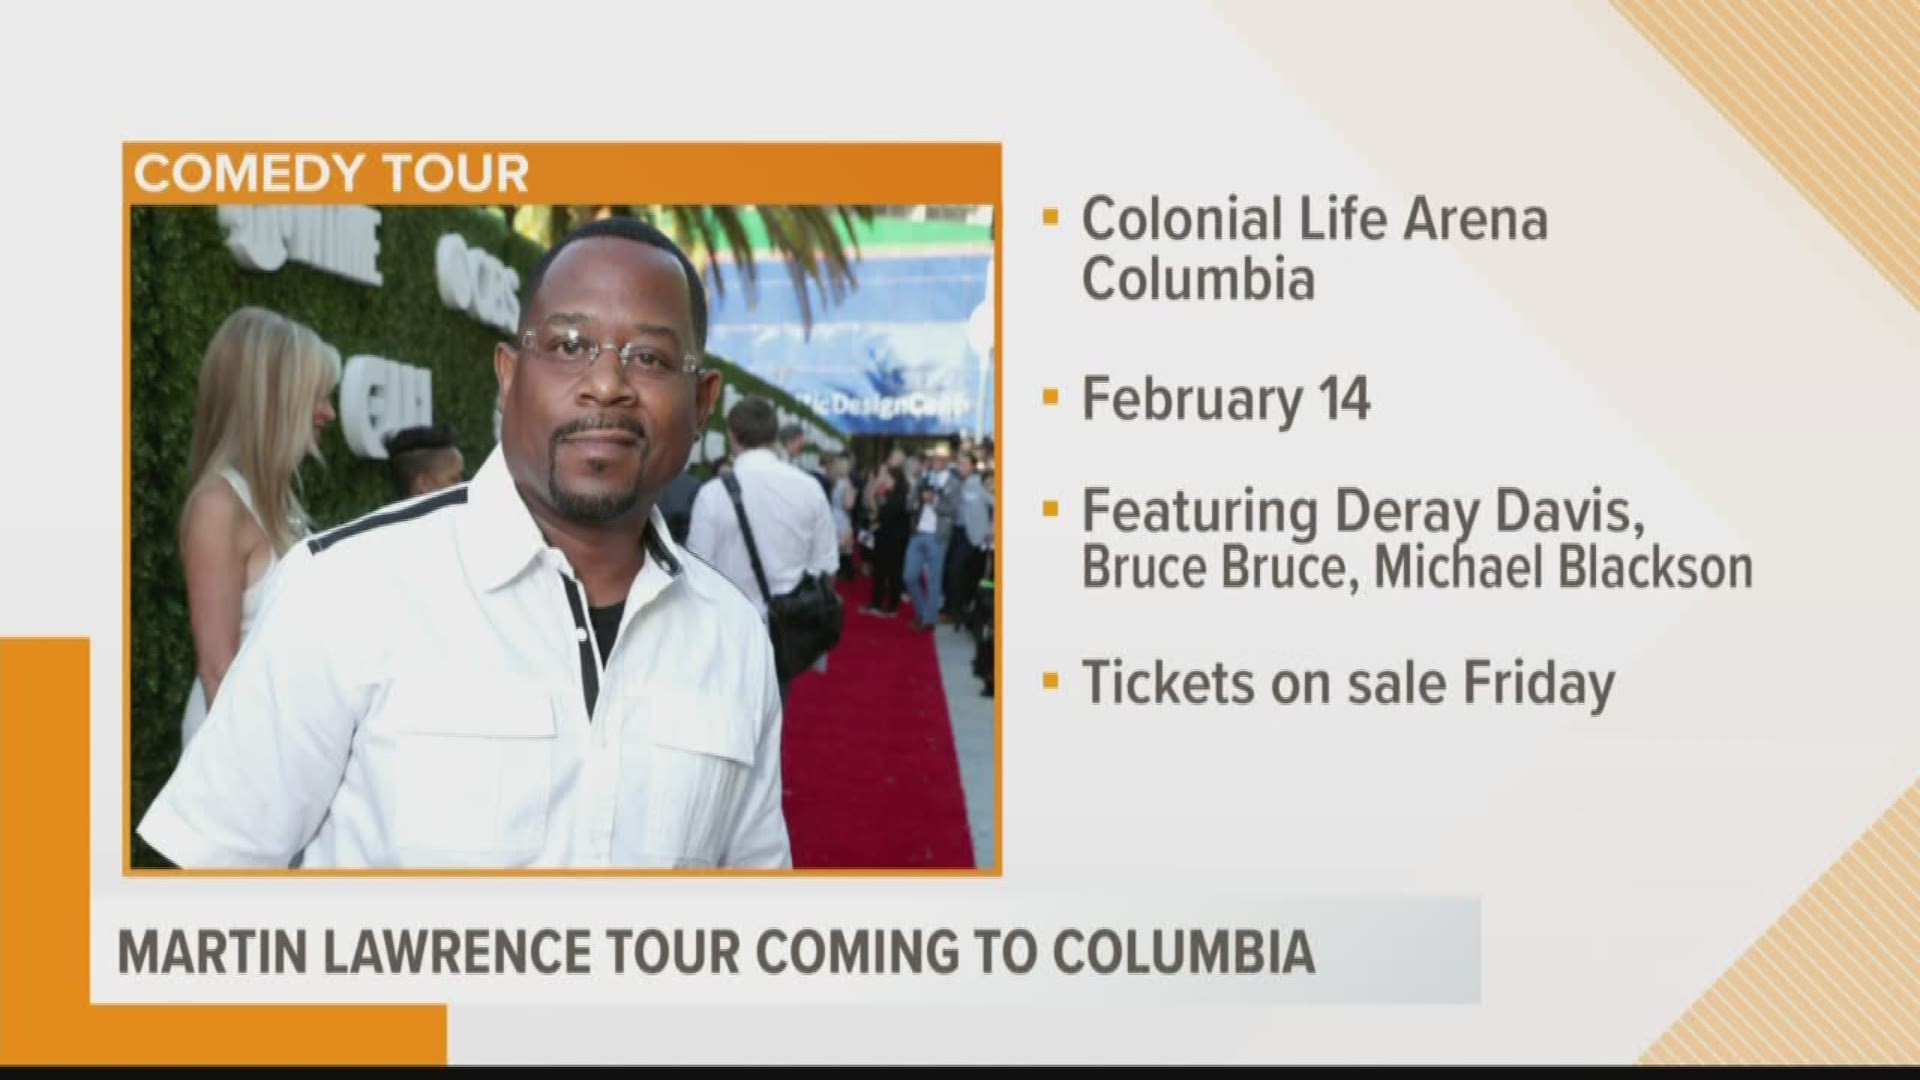 Martin Lawrence will bring the Lit AF Tour to the Colonial Life Arena on February 14. Martin will be the host of the event, and other comedians will join him.